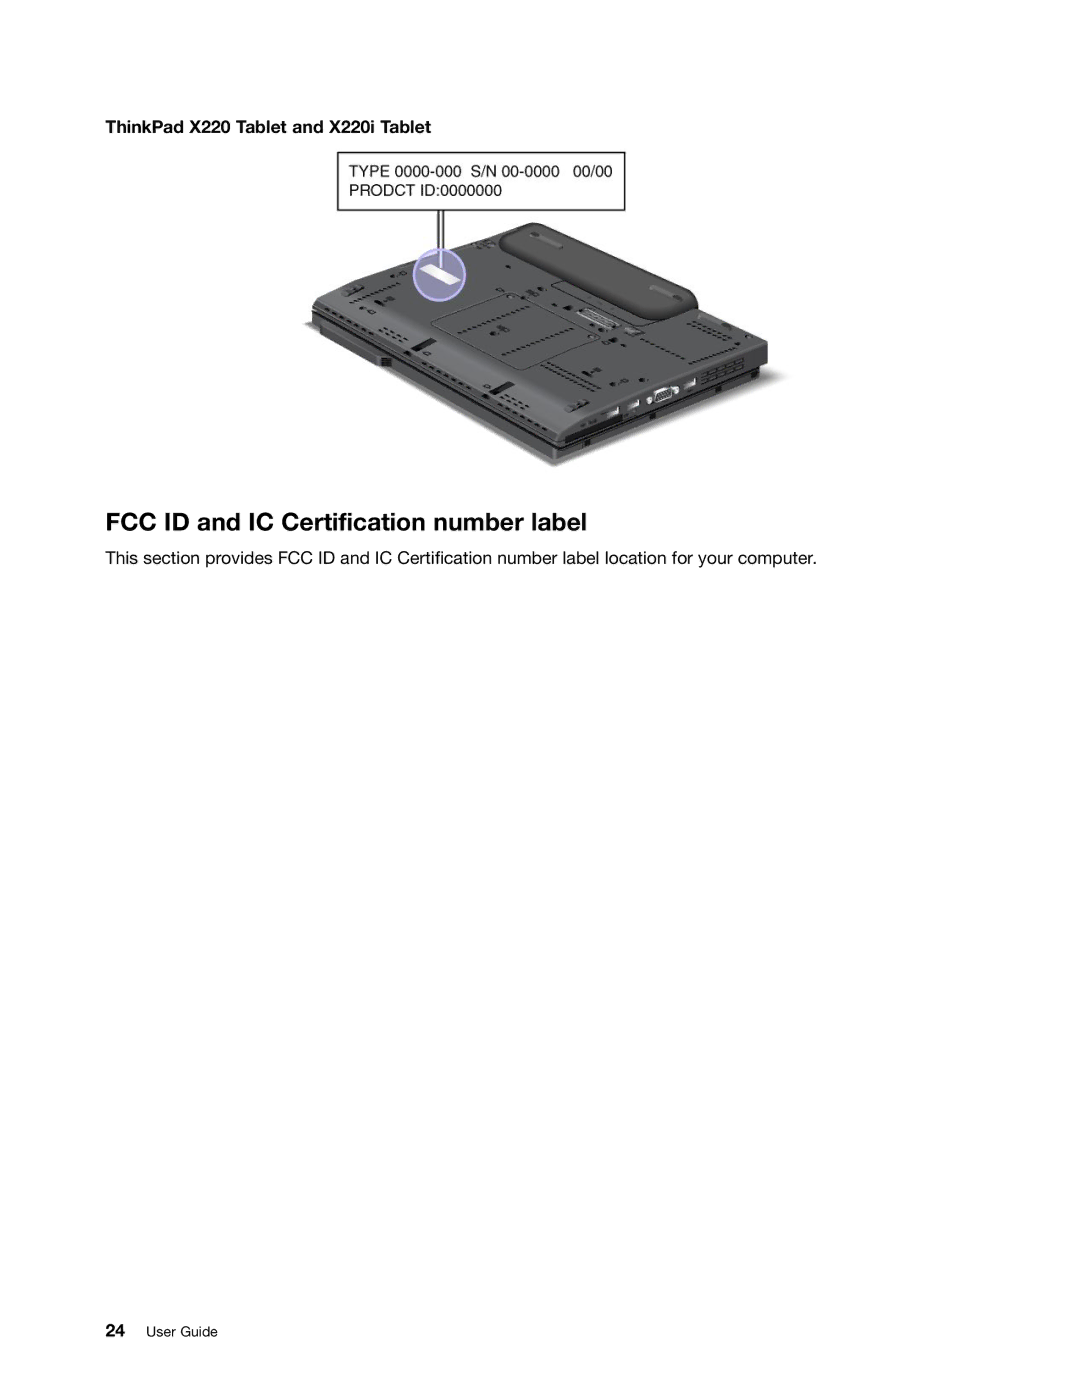 Lenovo 429040 manual FCC ID and IC Certification number label, ThinkPad X220 Tablet and X220i Tablet 